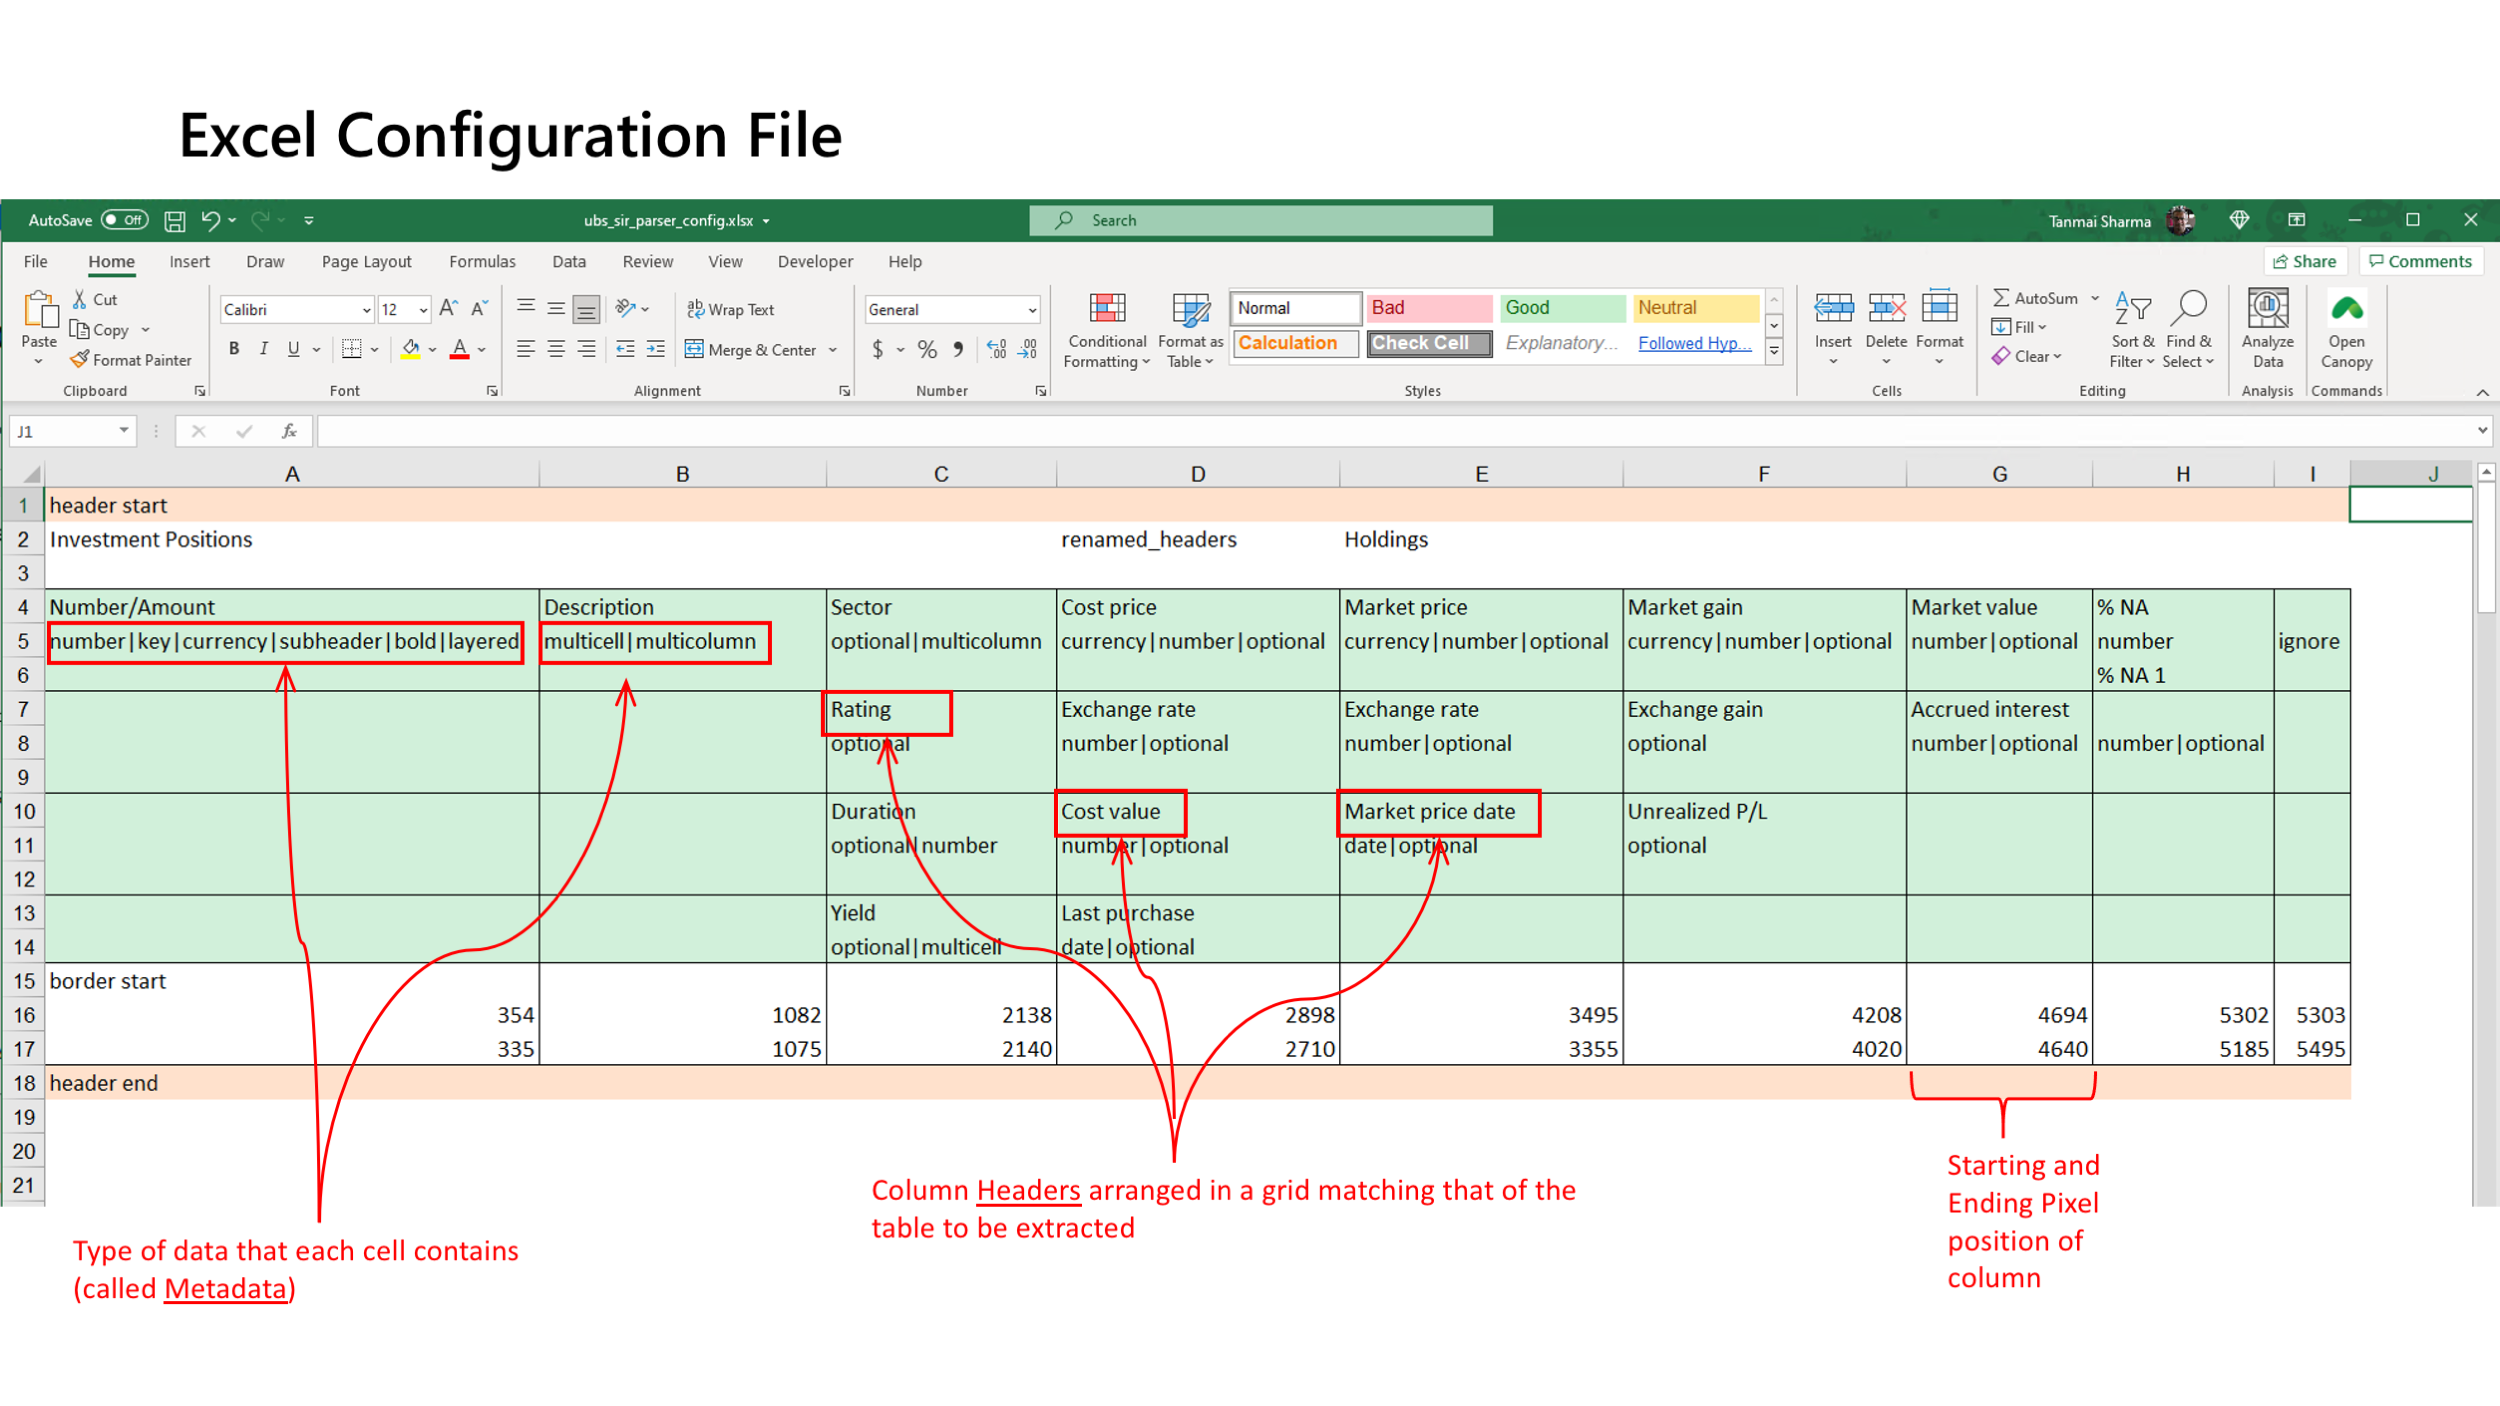 Excel Configuration file to extract the Holdings table in the image above